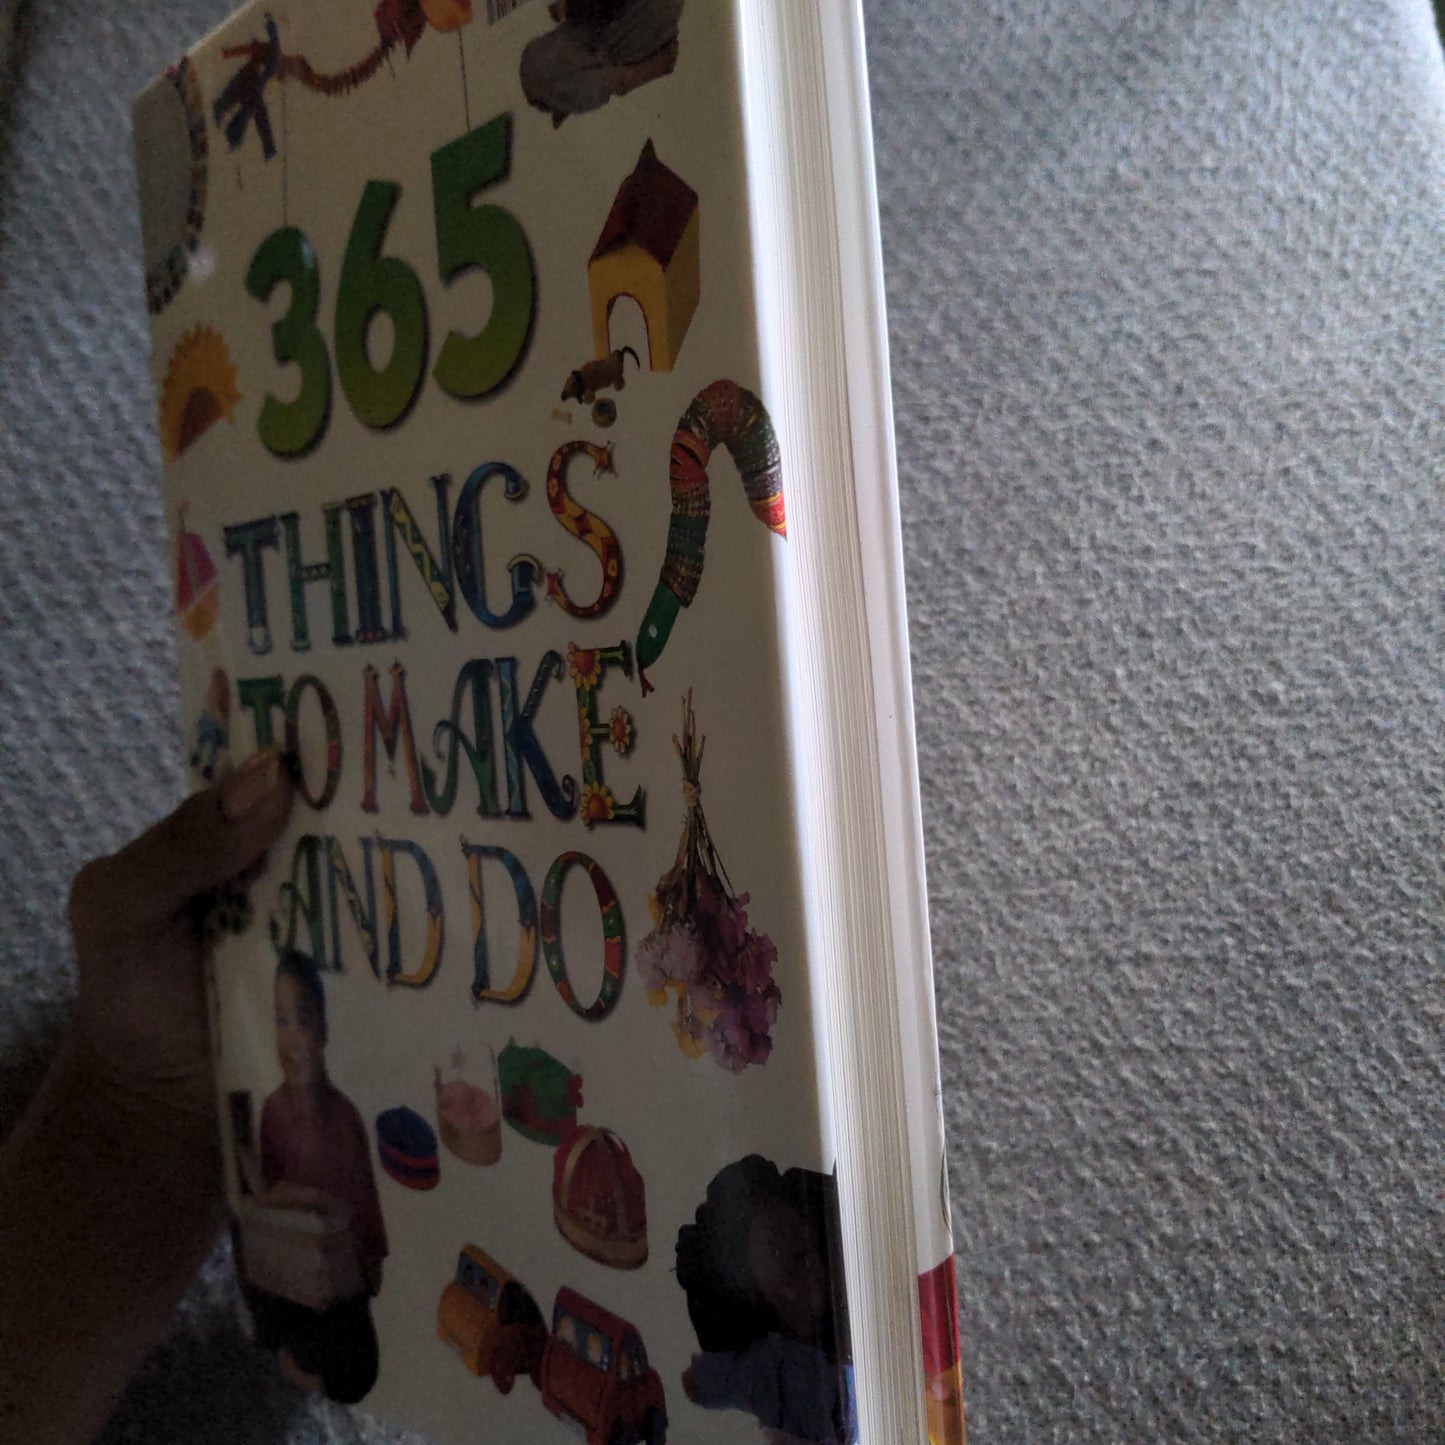 365 Things to make and do - Hardcover